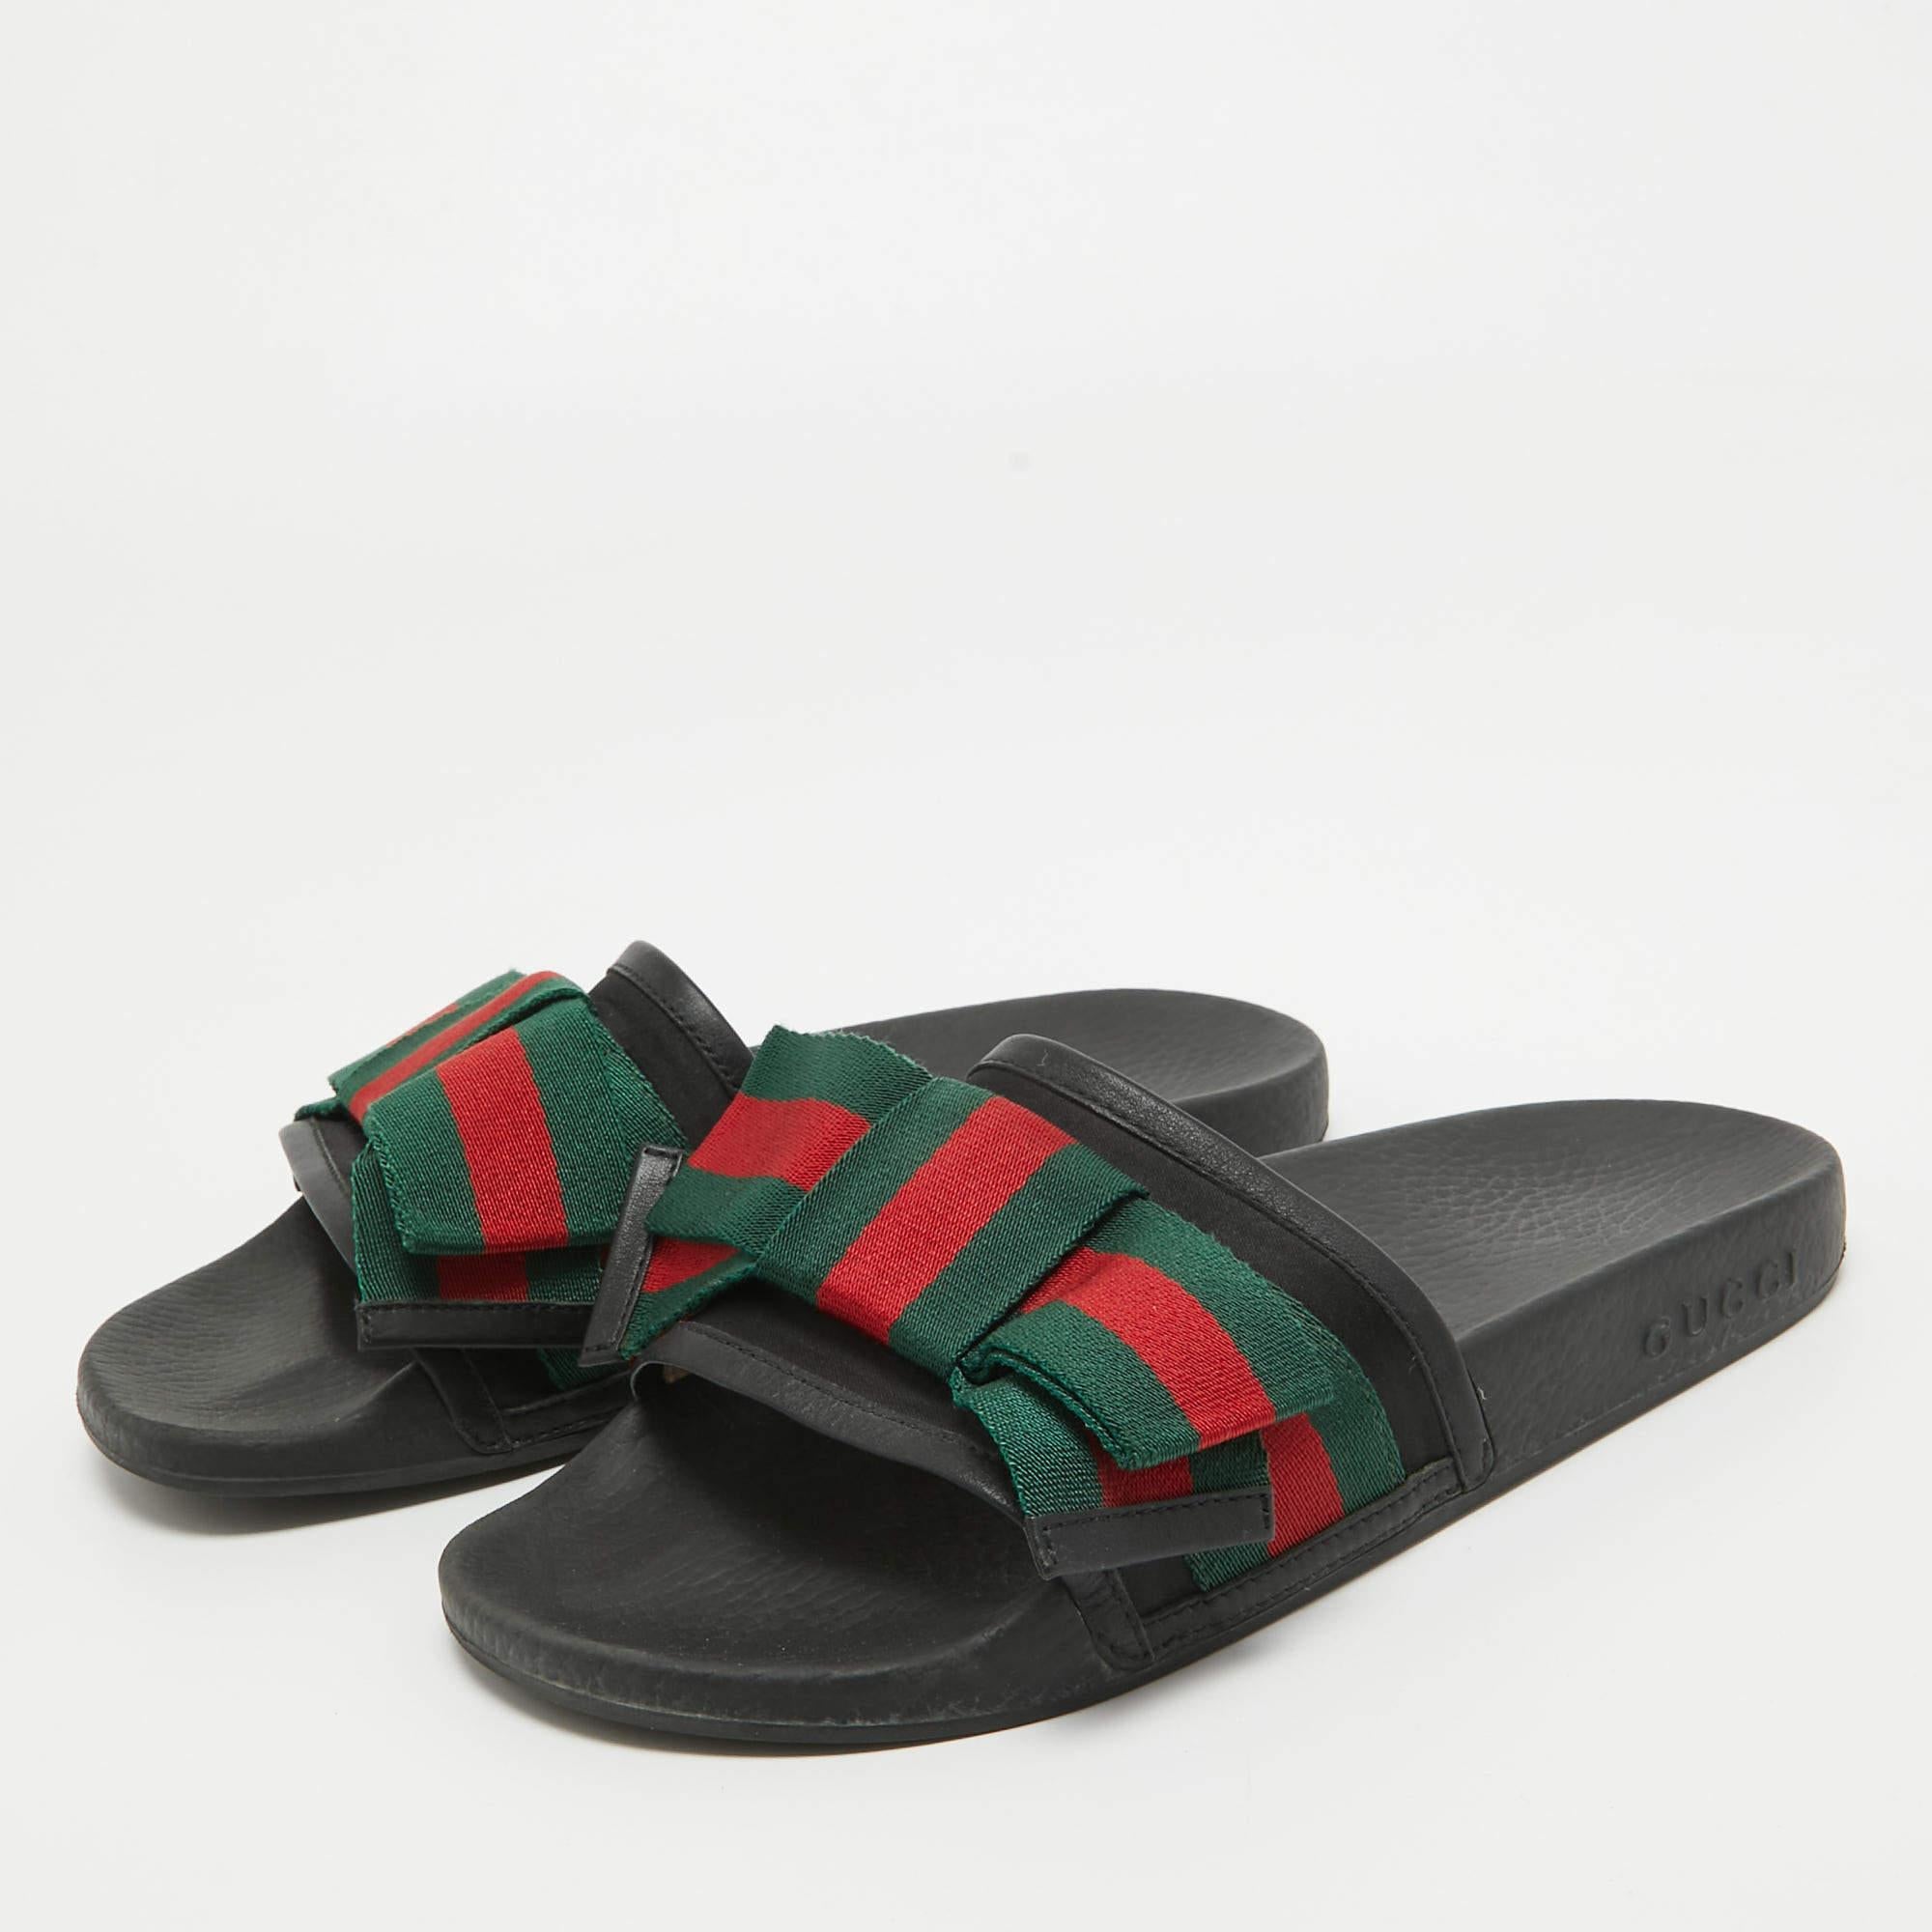 Let this comfortable pair be your first choice when you're home or at the pool. These Gucci slides have well-sewn uppers beautifully set on durable soles.

